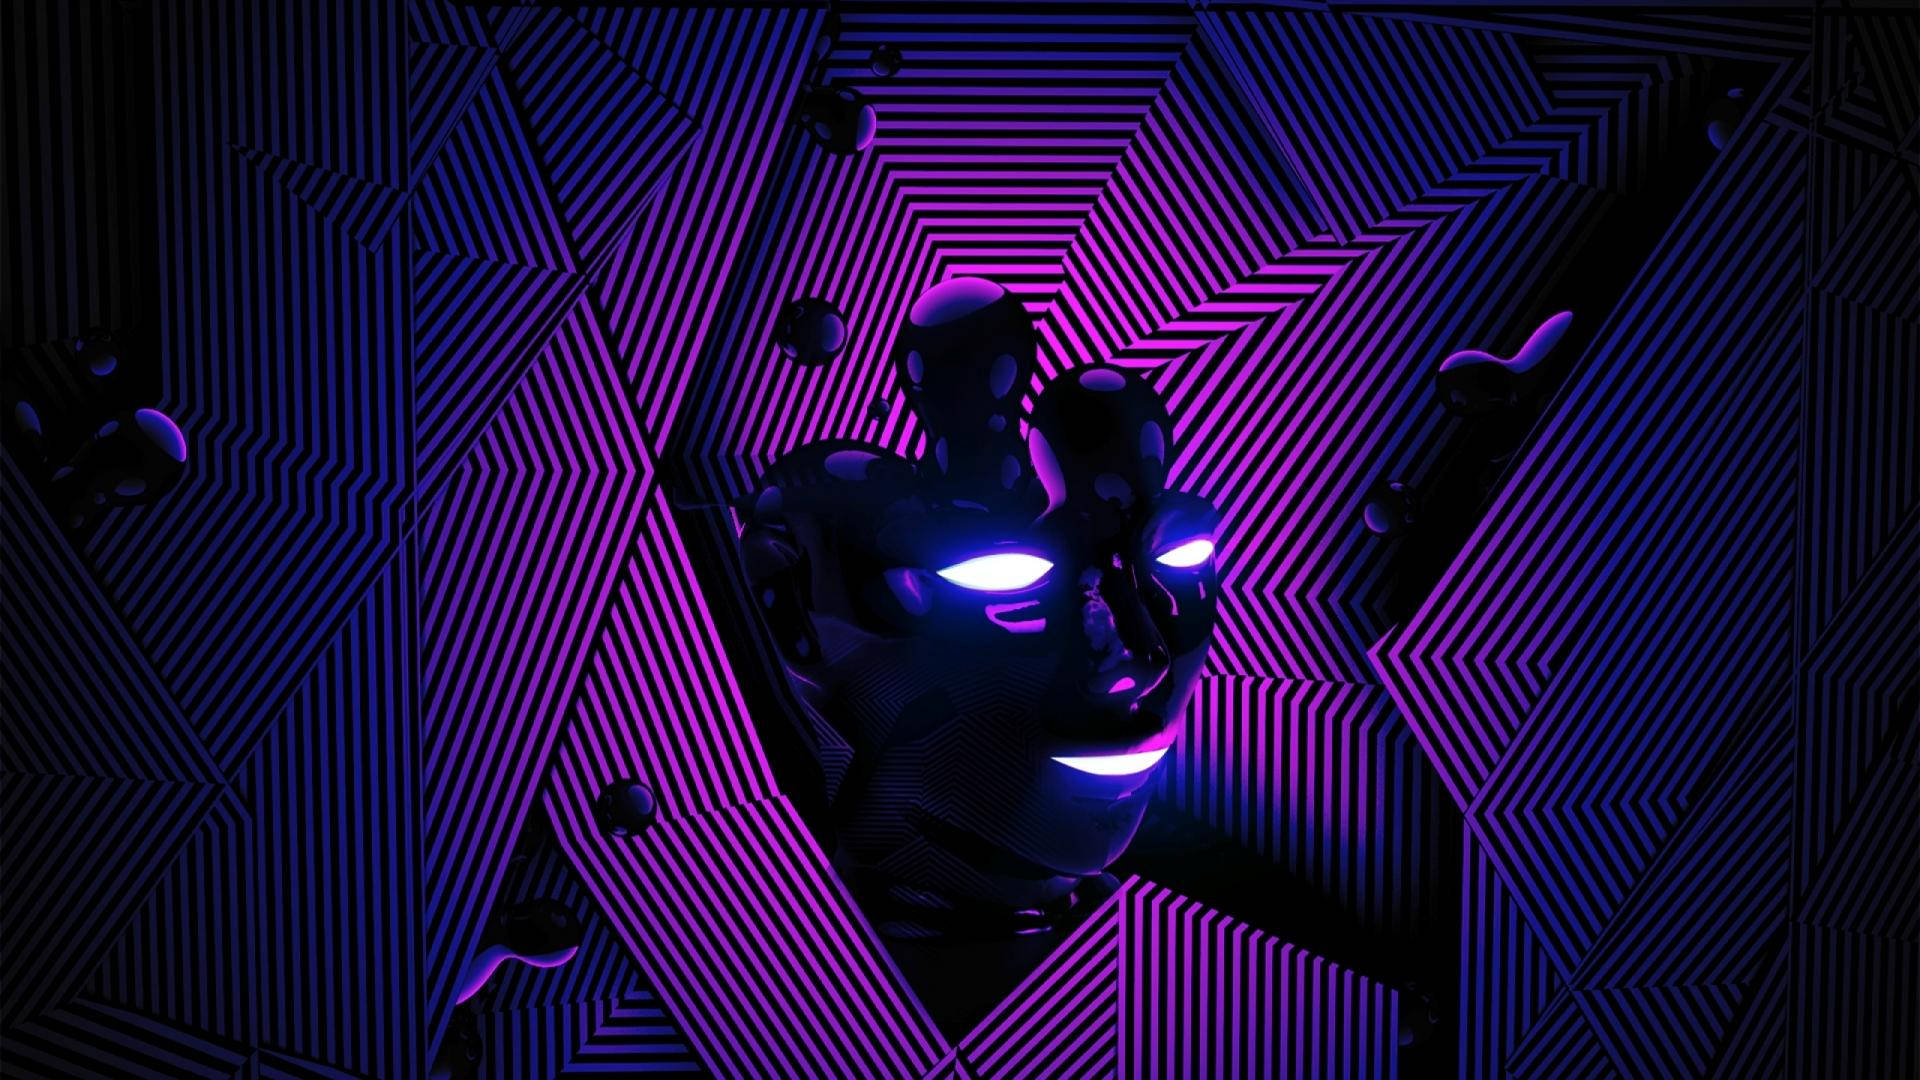 Cool Purple-themed Robot Face Background